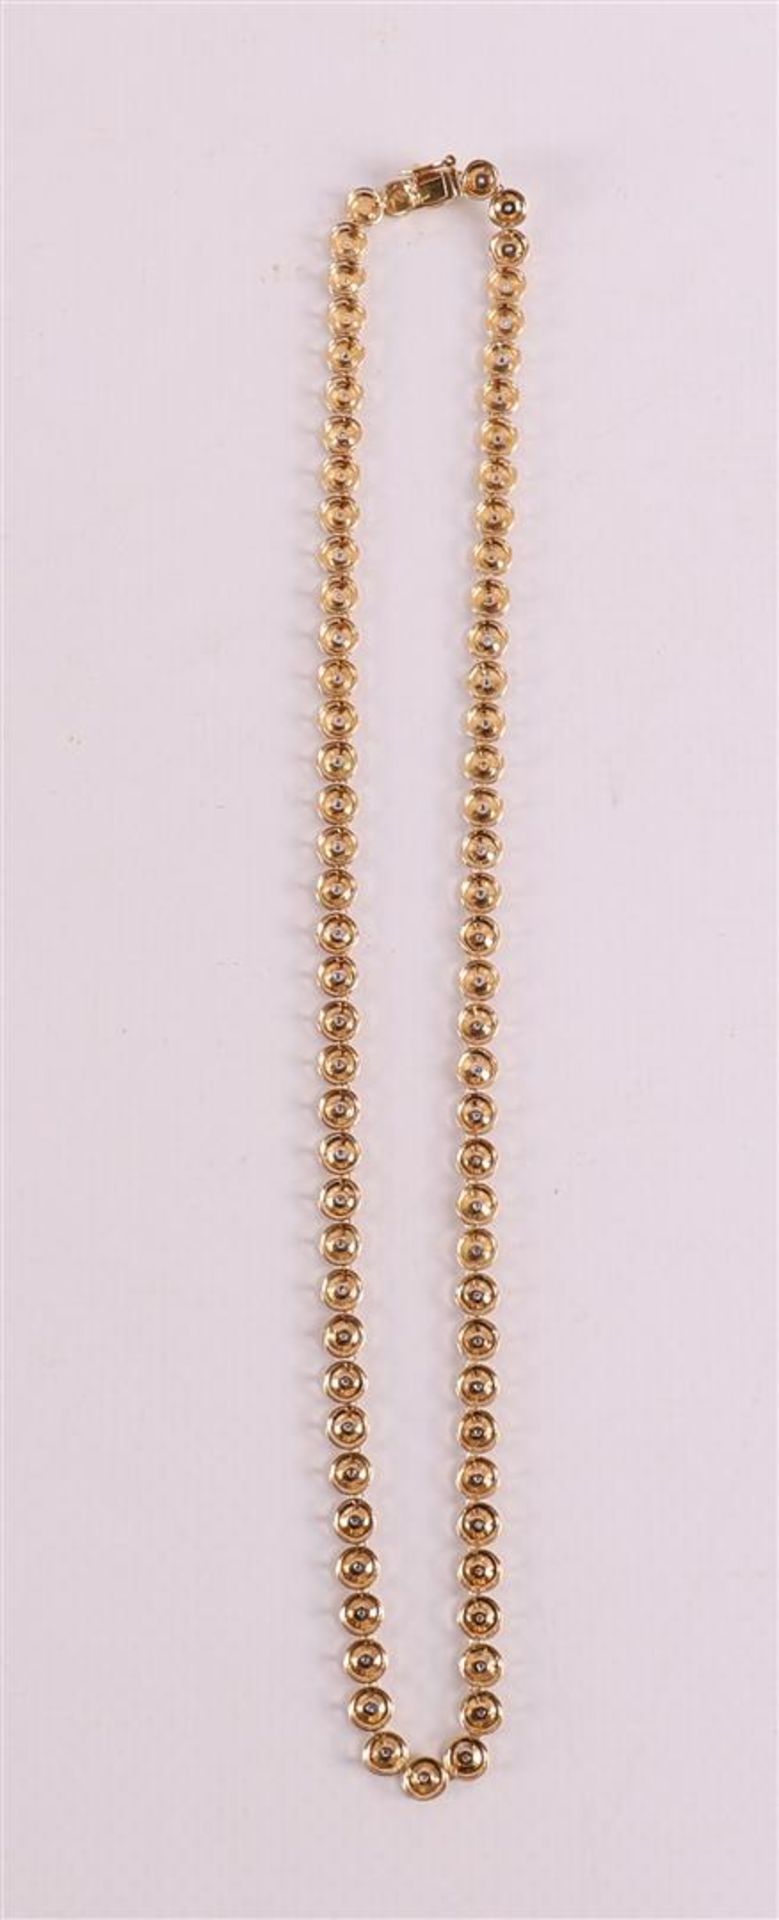 An 18 kt gold Riviera necklace with 78 diamonds. - Image 2 of 4